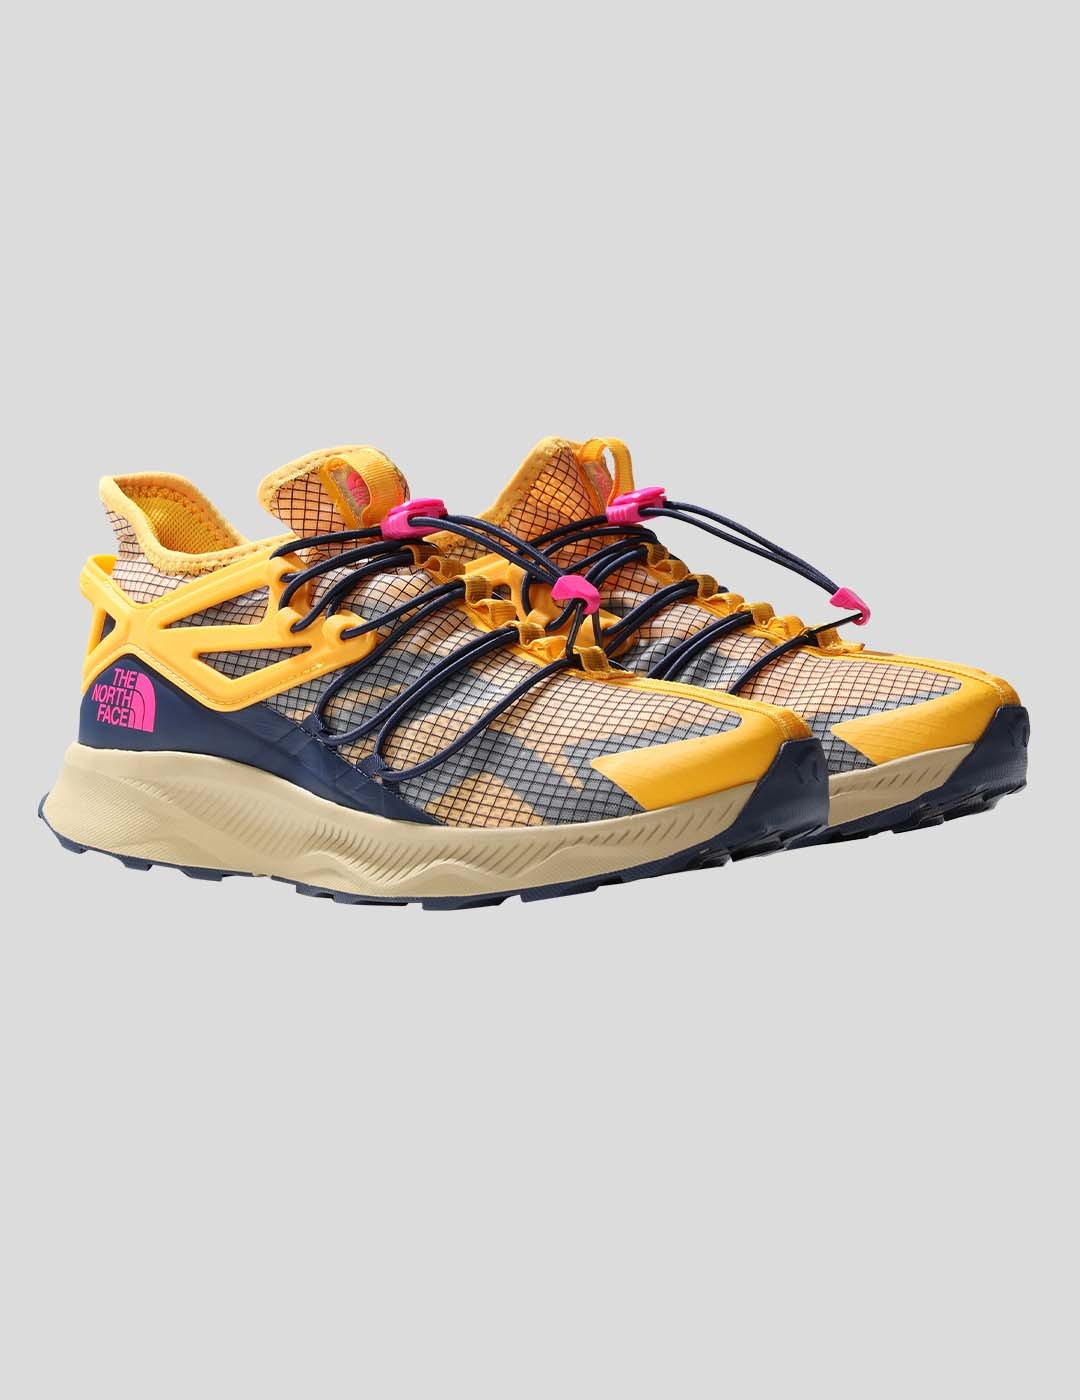 ZAPATILLAS THE NORTH FACE OXEYE TECH SUMMIT GOLD/SUMMIT NAVY